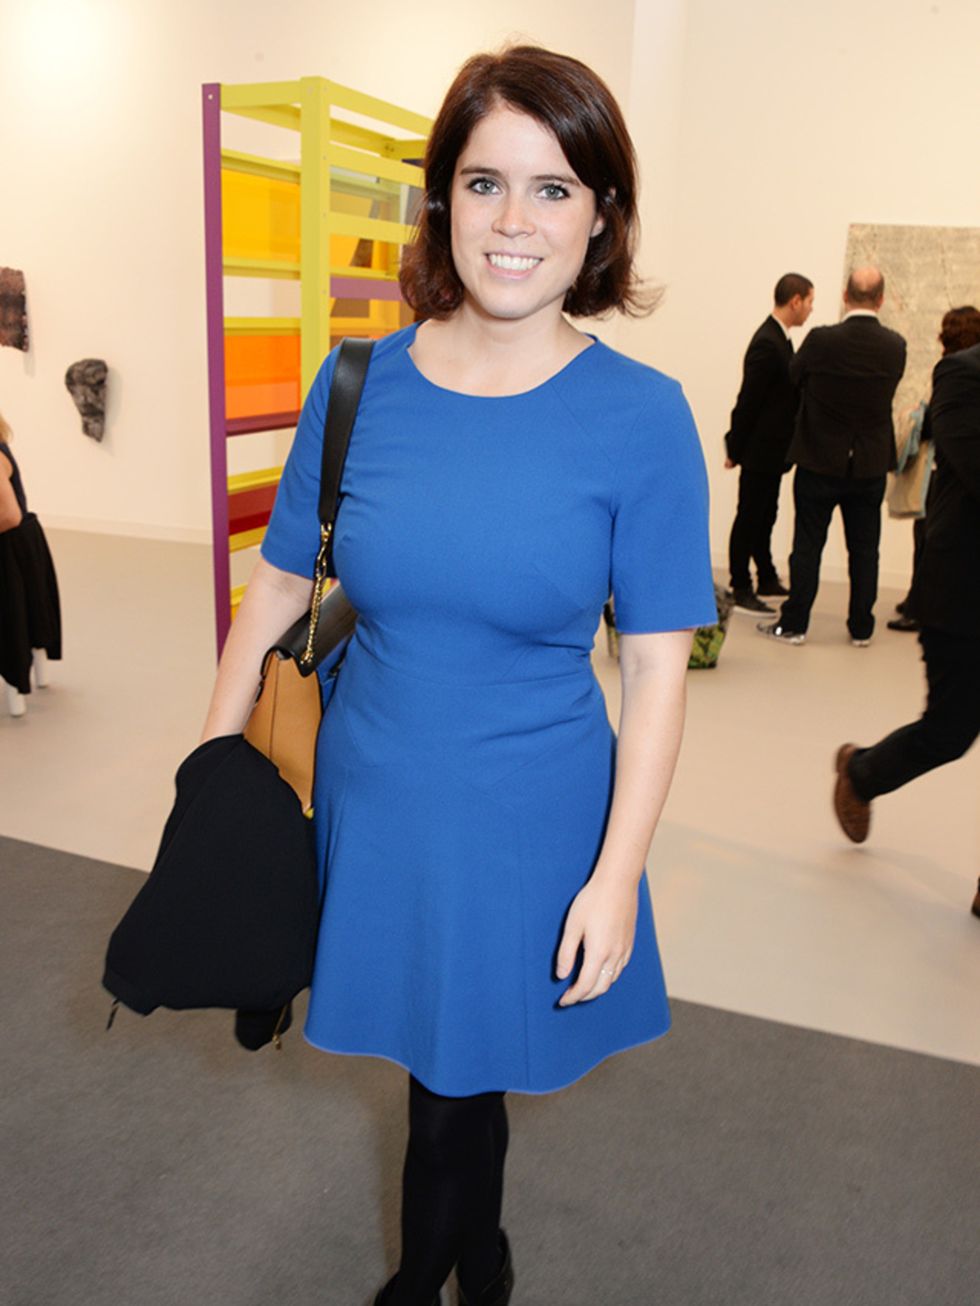 Princess Eugenie attends VIP preview of Frieze Art Fair in London, October 2014